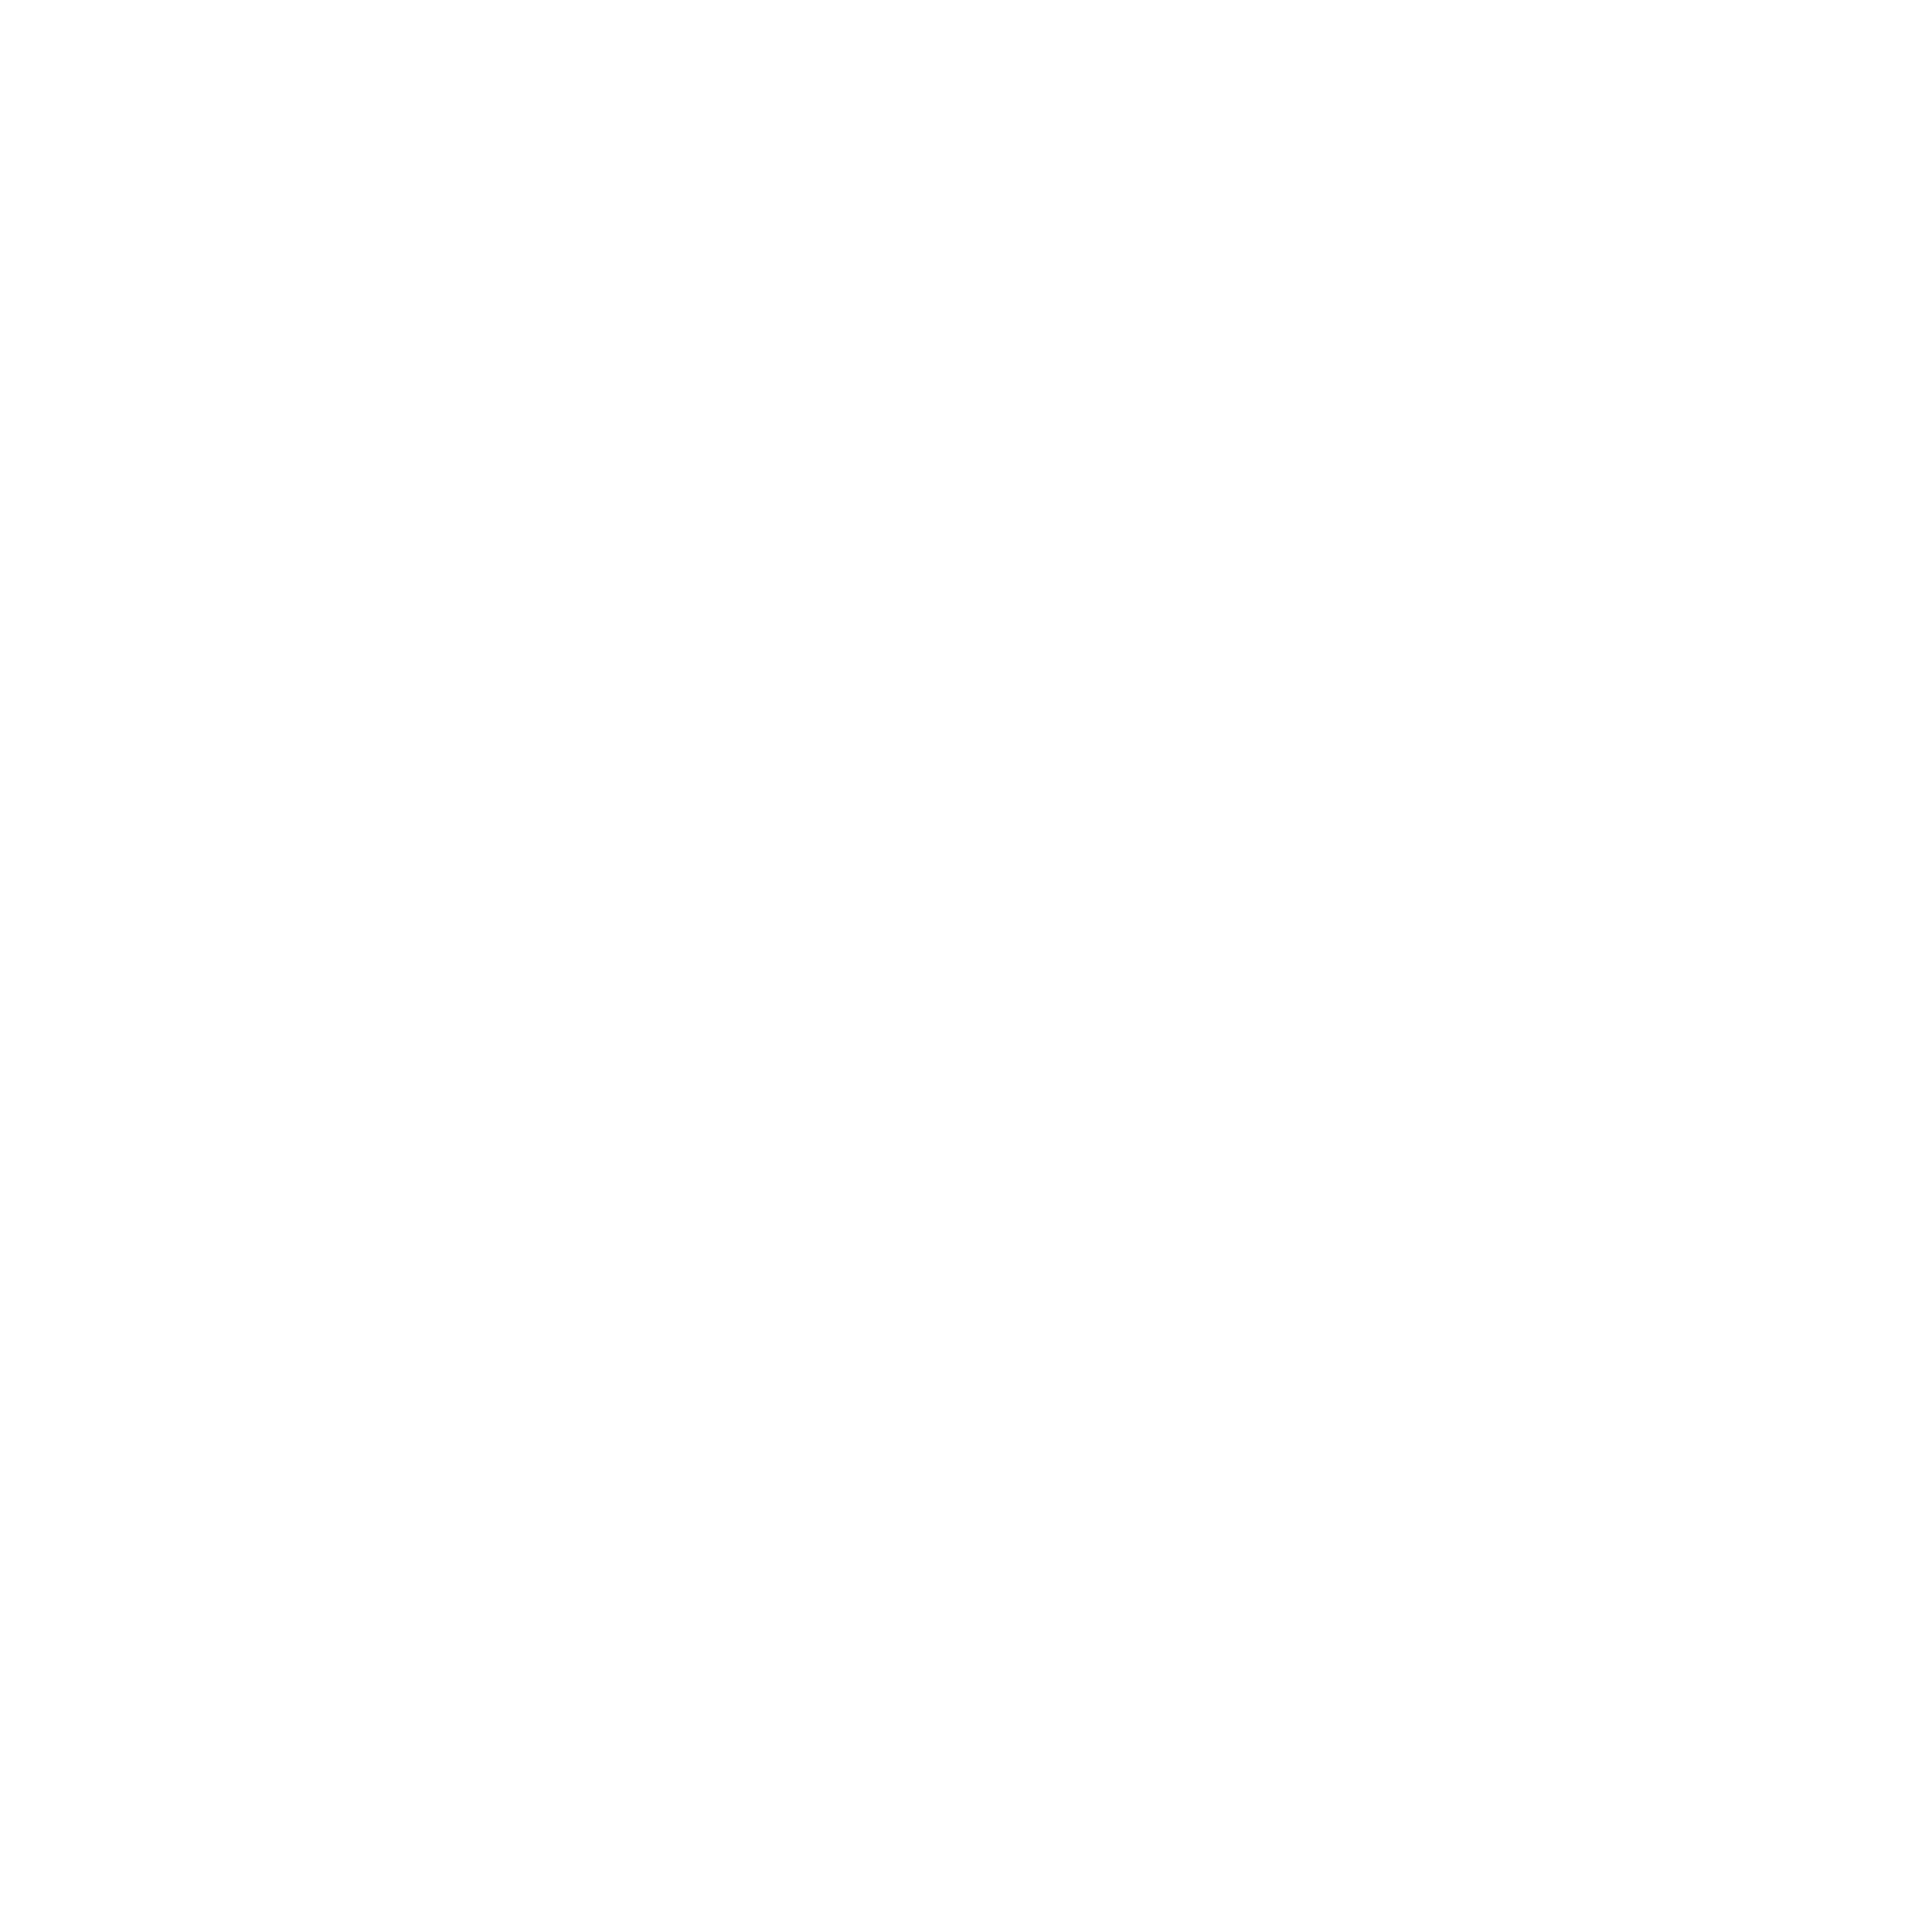 pawn for chess.